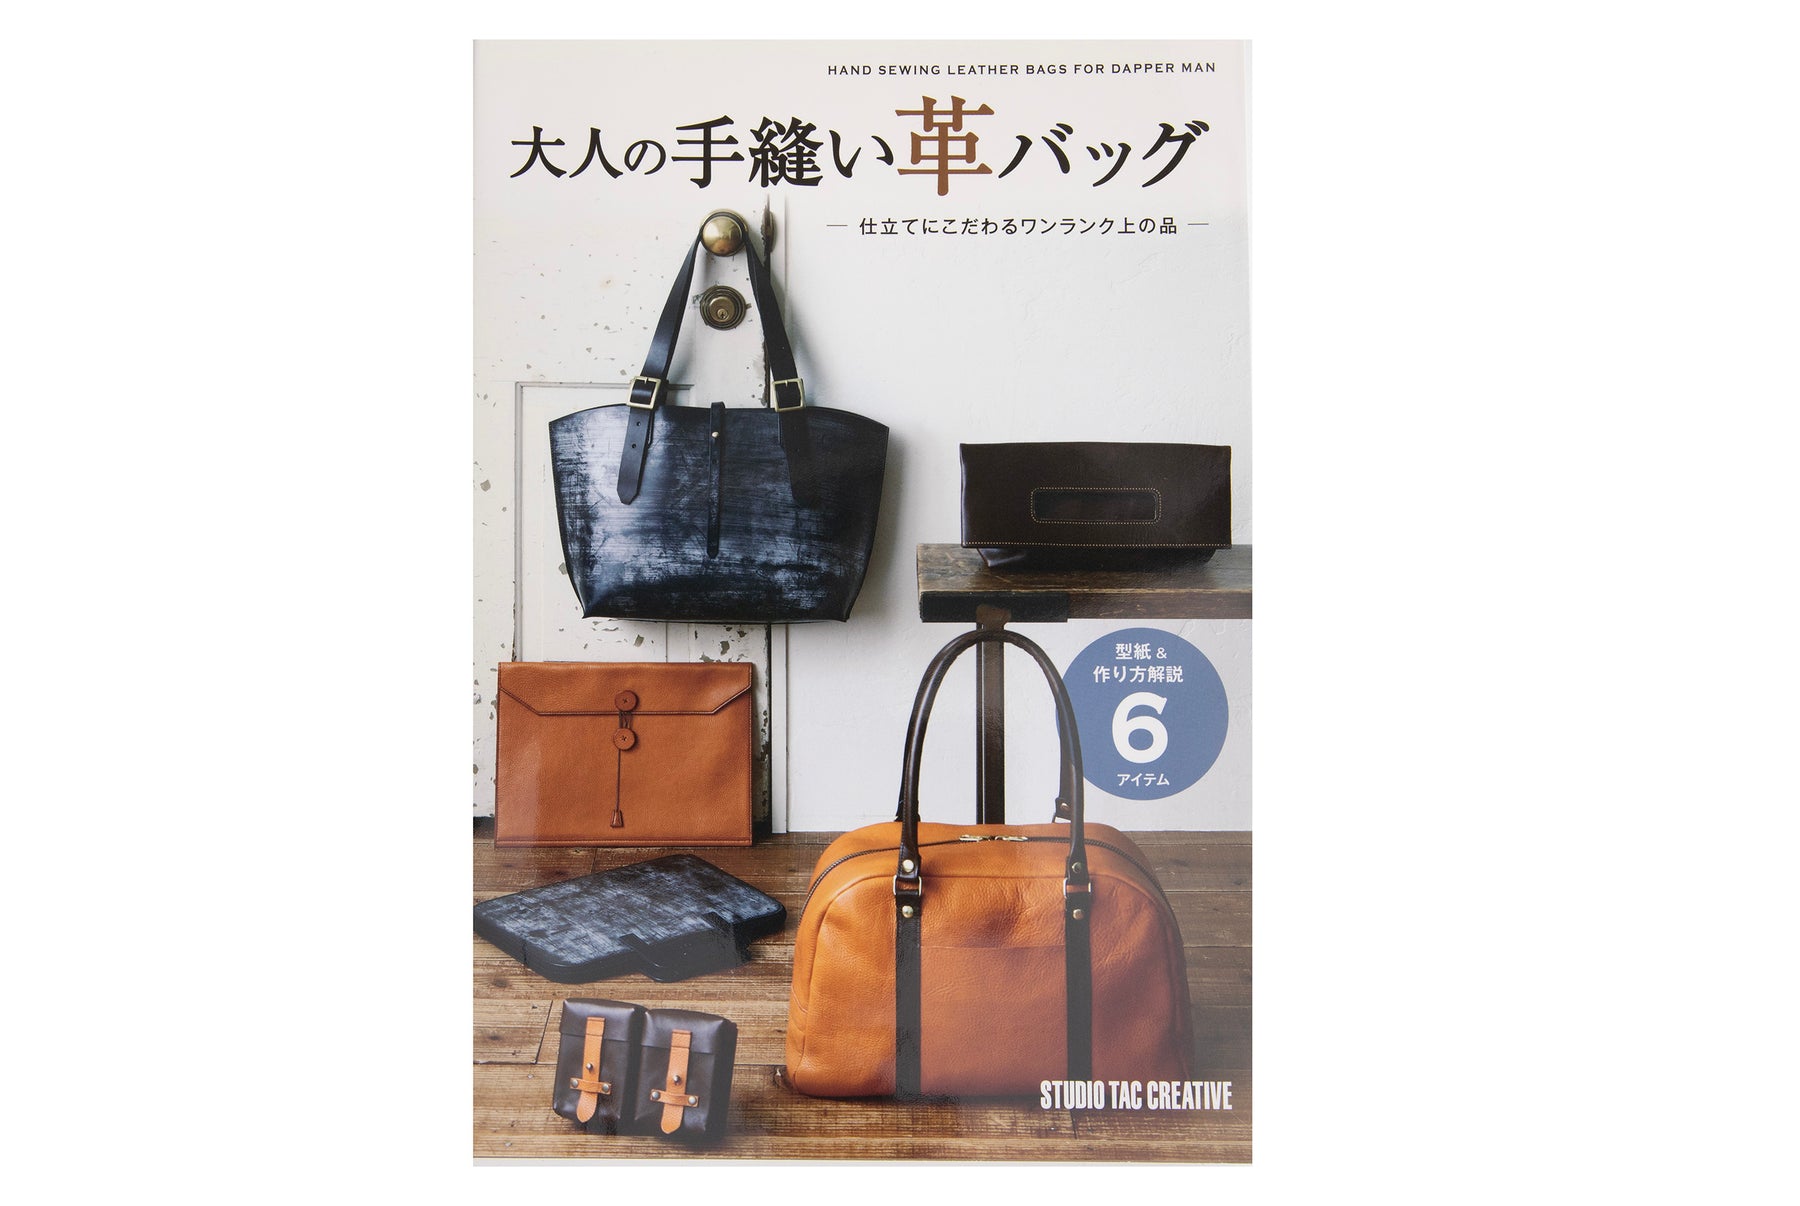 Studio Tac - Hand Sewing Leather Bags for the Dapper Man - 6 Projects - Instructional Book + Patterns (#7592)